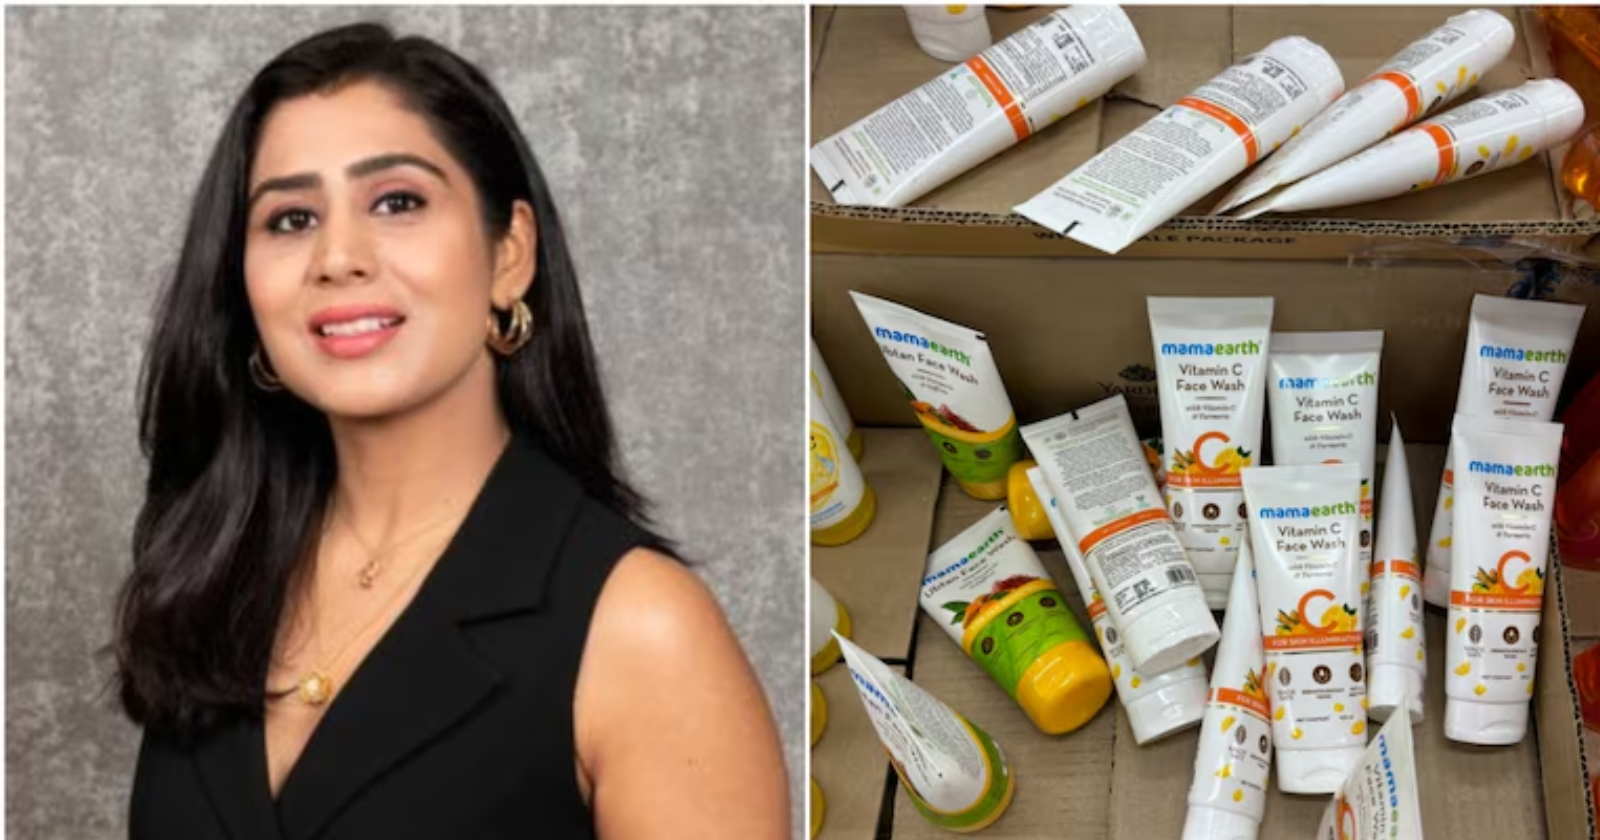 User Urges to Throw Away All Mamaearth Products Co Founder Ghazal